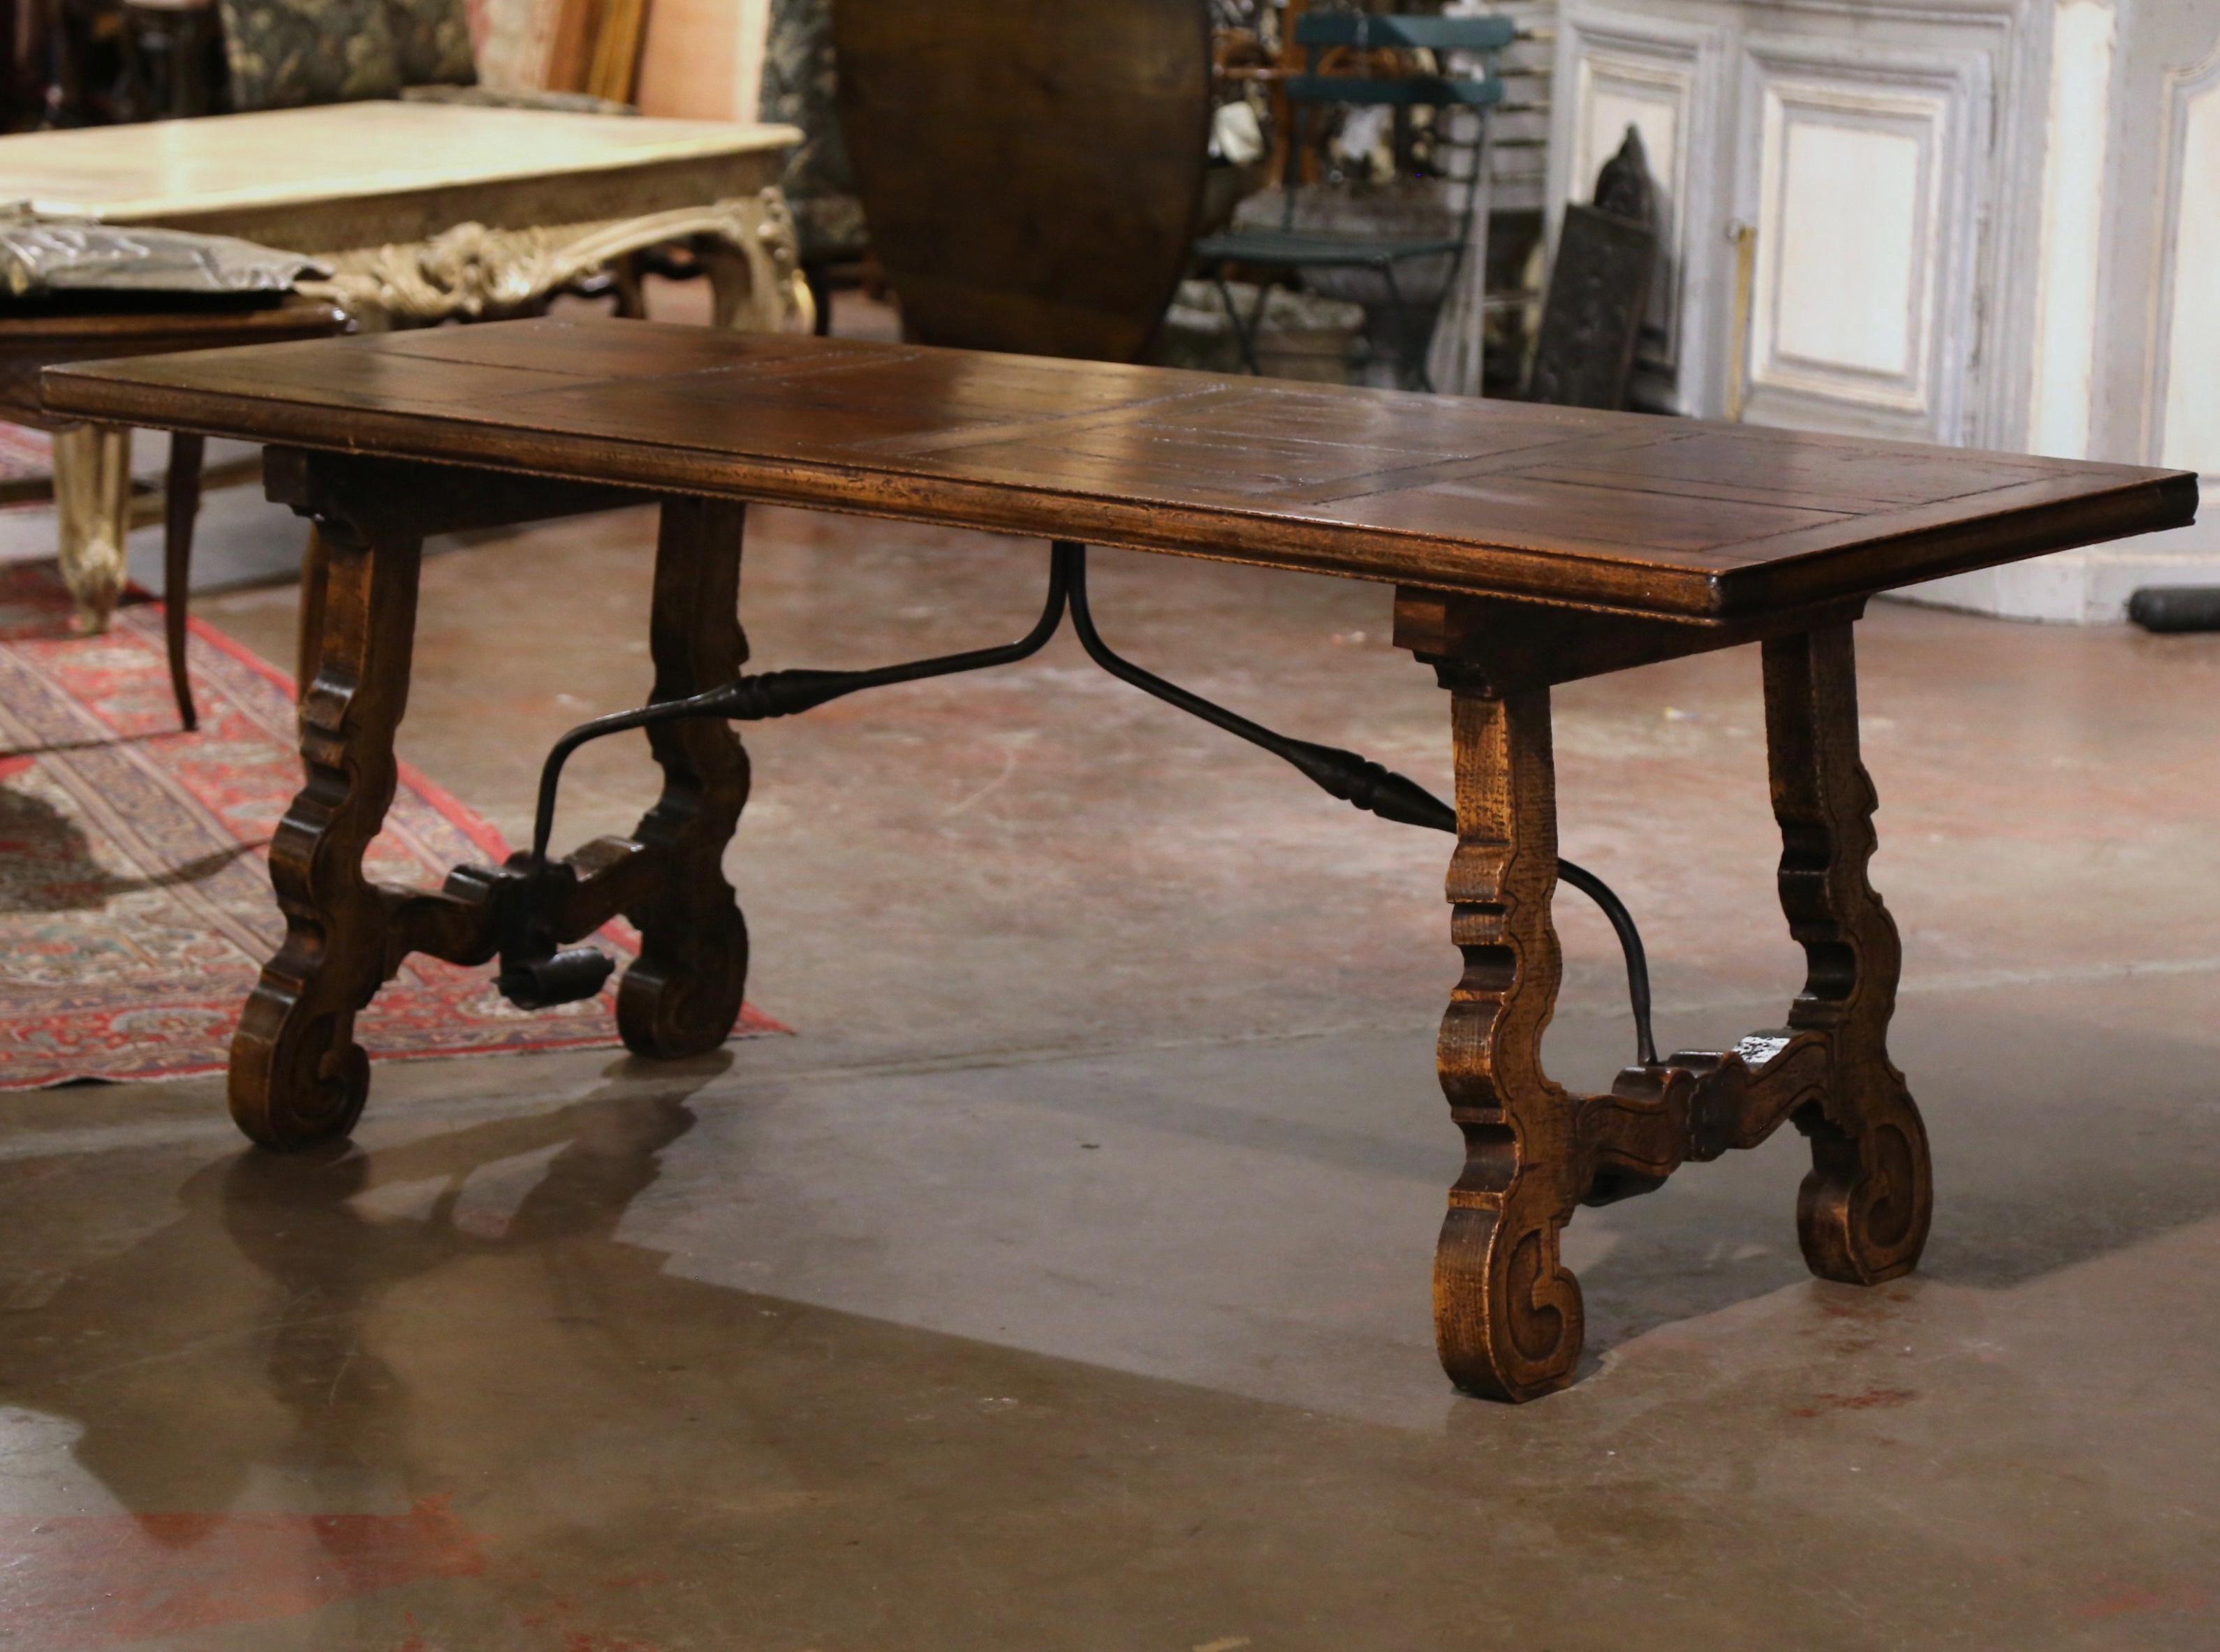 For a true Spanish look, use this elegant antique table in a dining or breakfast room. Crafted in Spain circa 1780, and built of solid chestnut and oak wood, the trestle table stands on two carved scrolled legs joined together with a forged iron